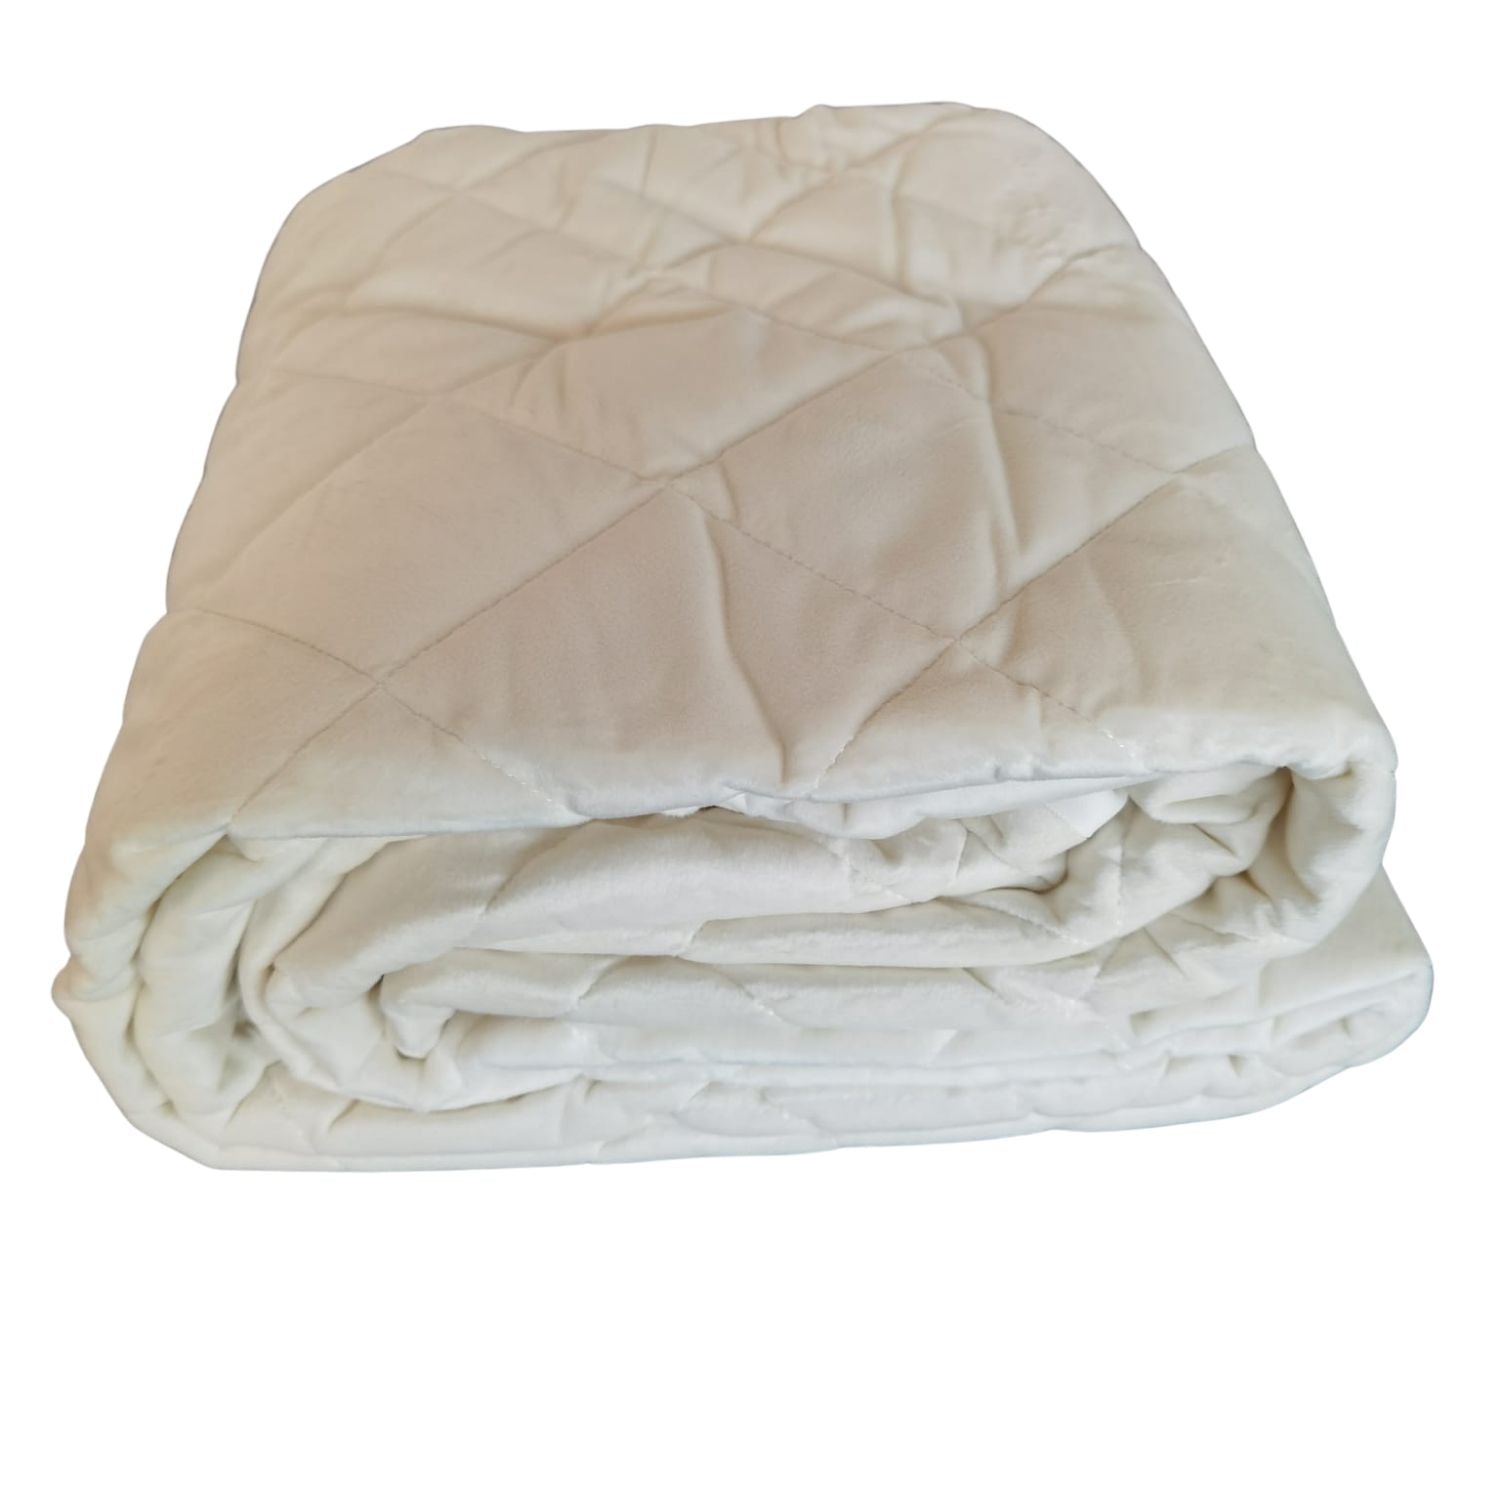 The Home Bedroom Fleece Mattress Protector - White - Double Size 1 Shaws Department Stores